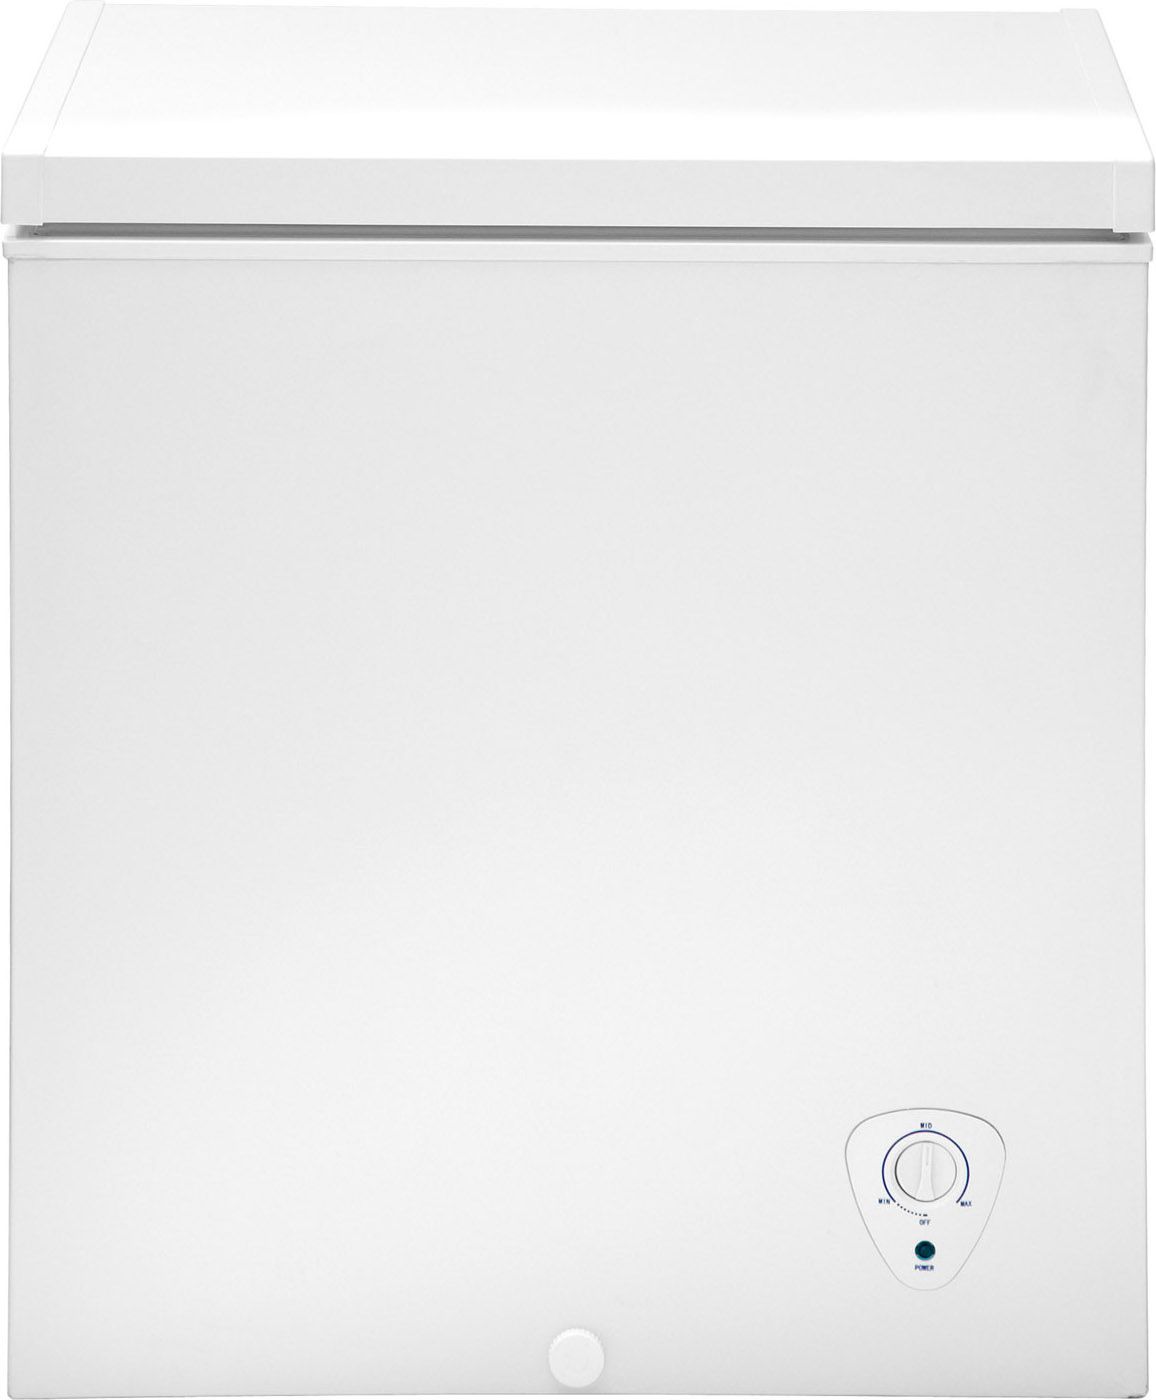 Kenmore 5.1 cu. ft. Chest Freezer - White